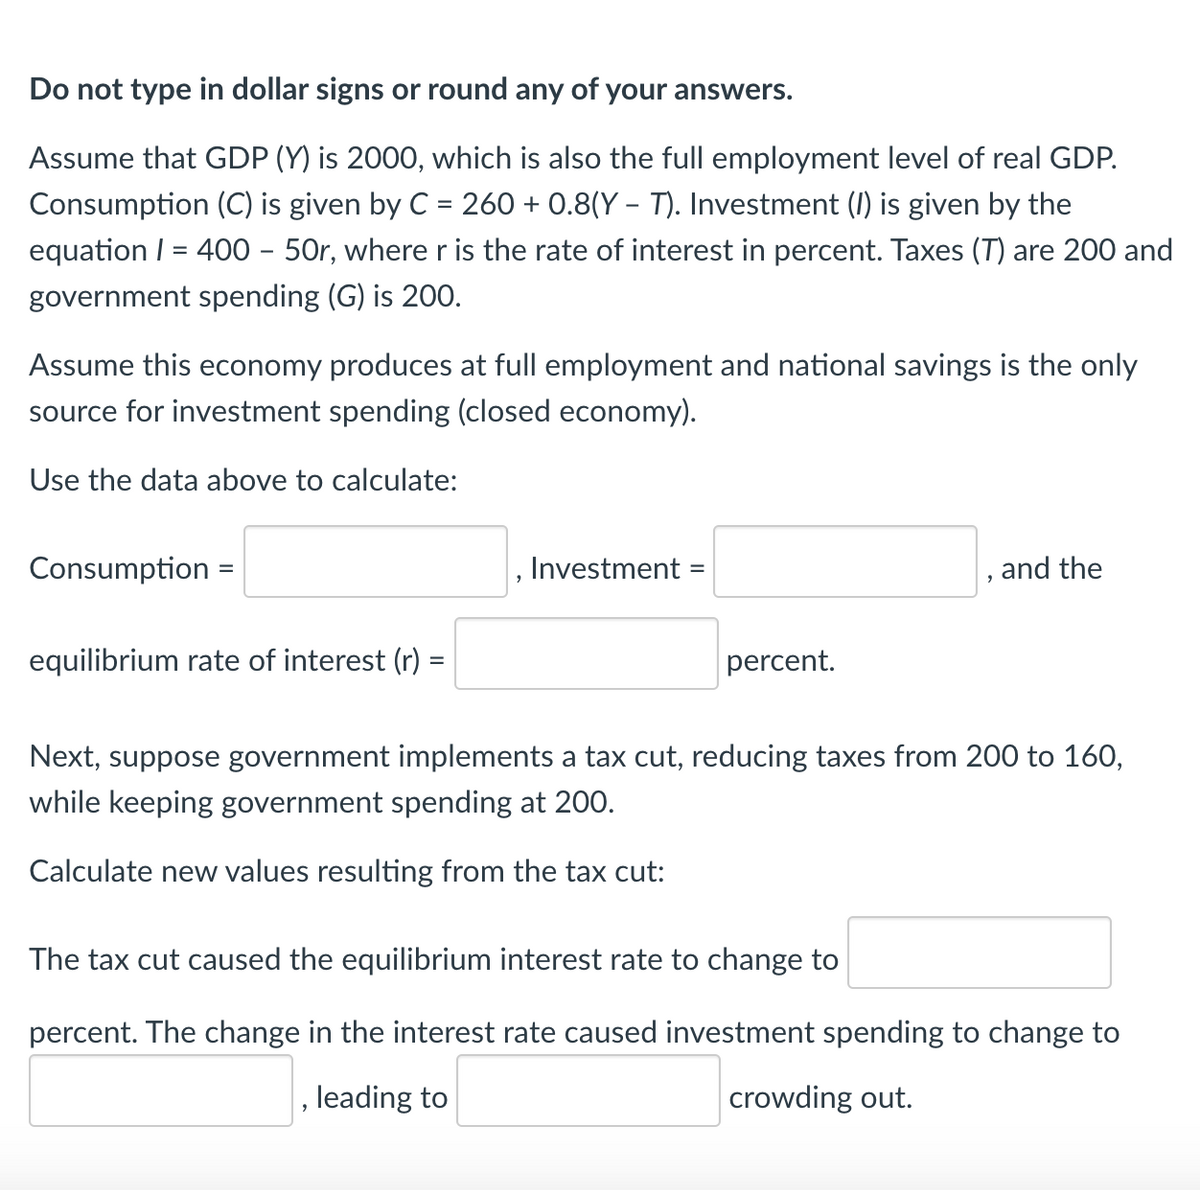 Do not type in dollar signs or round any of your answers.
Assume that GDP (Y) is 2000, which is also the full employment level of real GDP.
Consumption (C) is given by C = 260 + 0.8(Y – T). Investment (1) is given by the
%3D
equation / = 400 – 50r, wherer is the rate of interest in percent. Taxes (T) are 200 and
government spending (G) is 200.
Assume this economy produces at full employment and national savings is the only
source for investment spending (closed economy).
Use the data above to calculate:
Consumption :
, Investment:
, and the
equilibrium rate of interest (r)
percent.
Next, suppose government implements a tax cut, reducing taxes from 200 to 160,
while keeping government spending at 200.
Calculate new values resulting from the tax cut:
The tax cut caused the equilibrium interest rate to change to
percent. The change in the interest rate caused investment spending to change to
leading to
crowding out.
